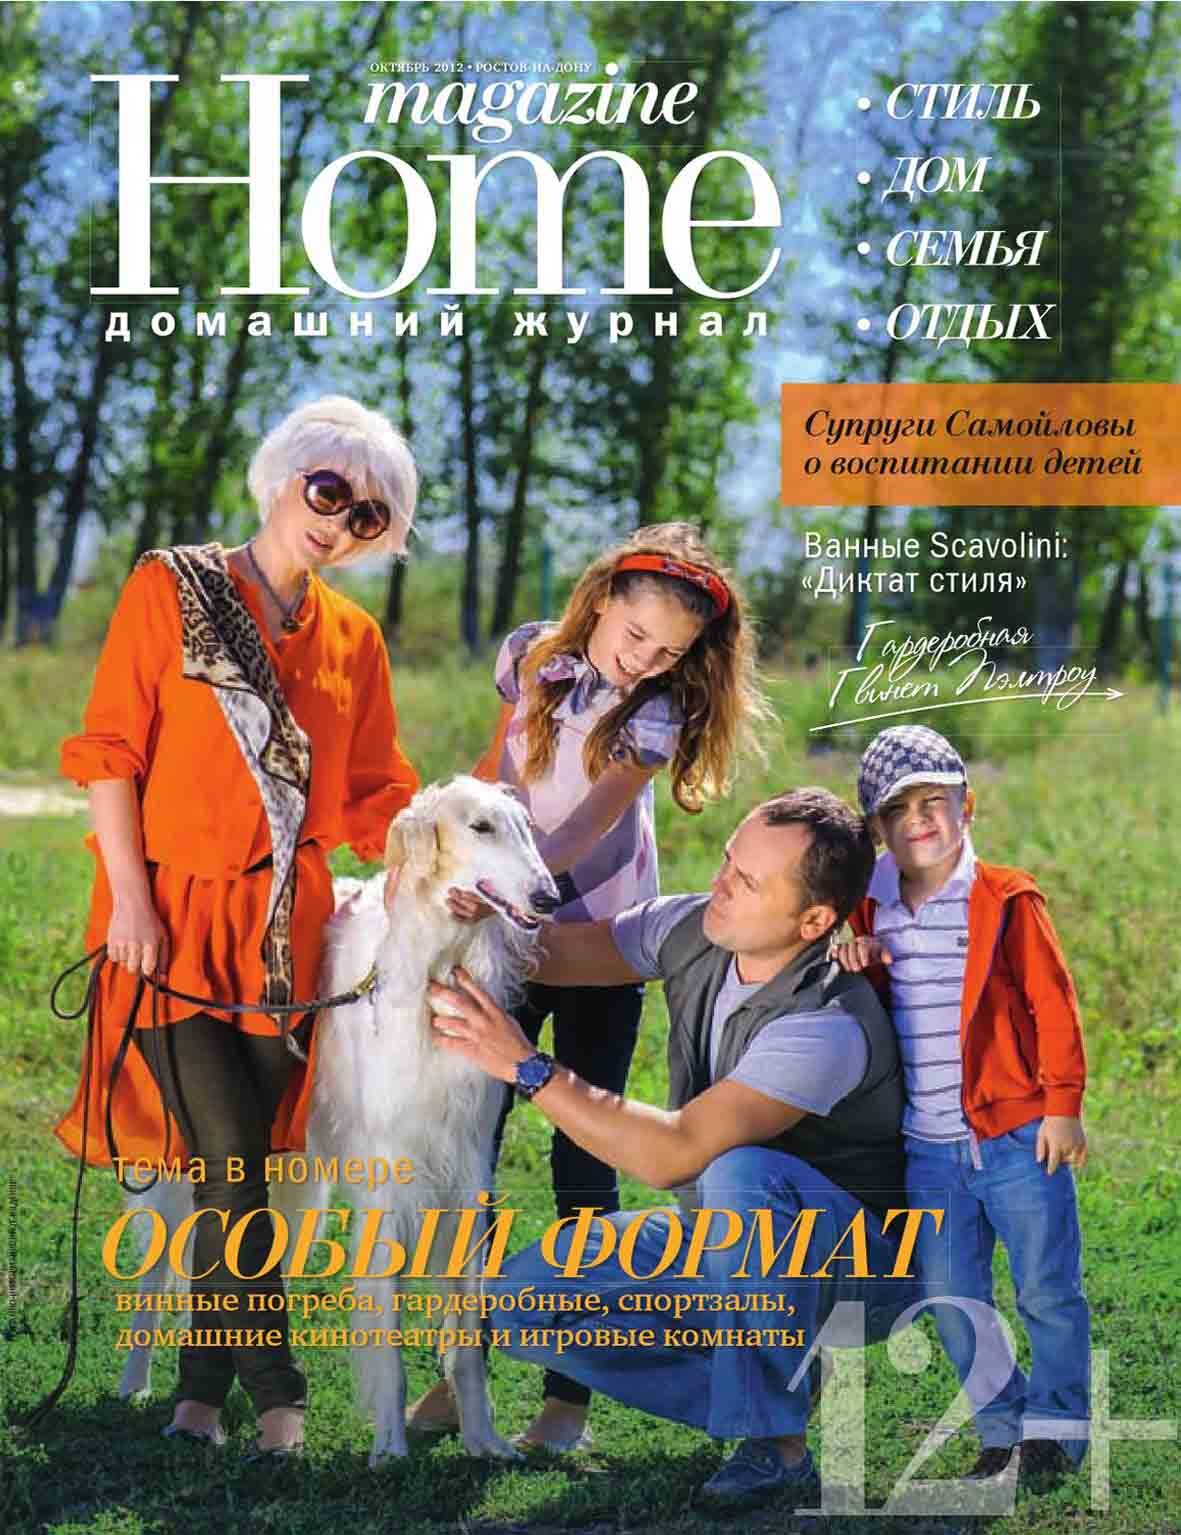 HOME RUSSIA, OCT 2012